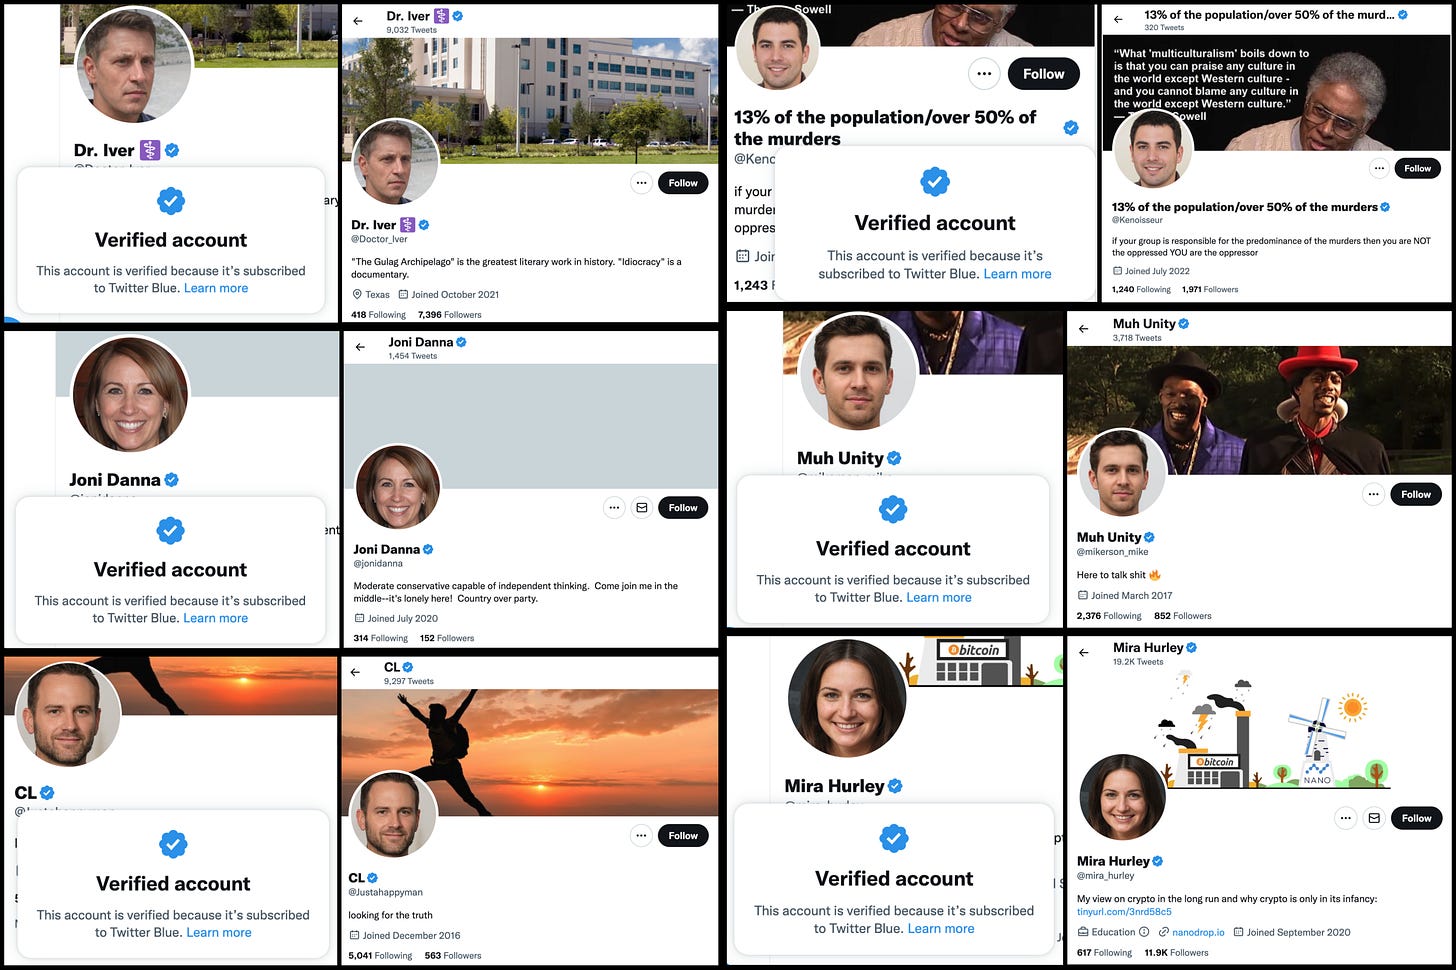 collage of the profiles of six Twitter Blue verified accounts with GAN-generated faces: @Doctor_Iver, @jonidanna, @Justahappyman, @Kenoisseur, @mikerson_mike, @mira_hurley